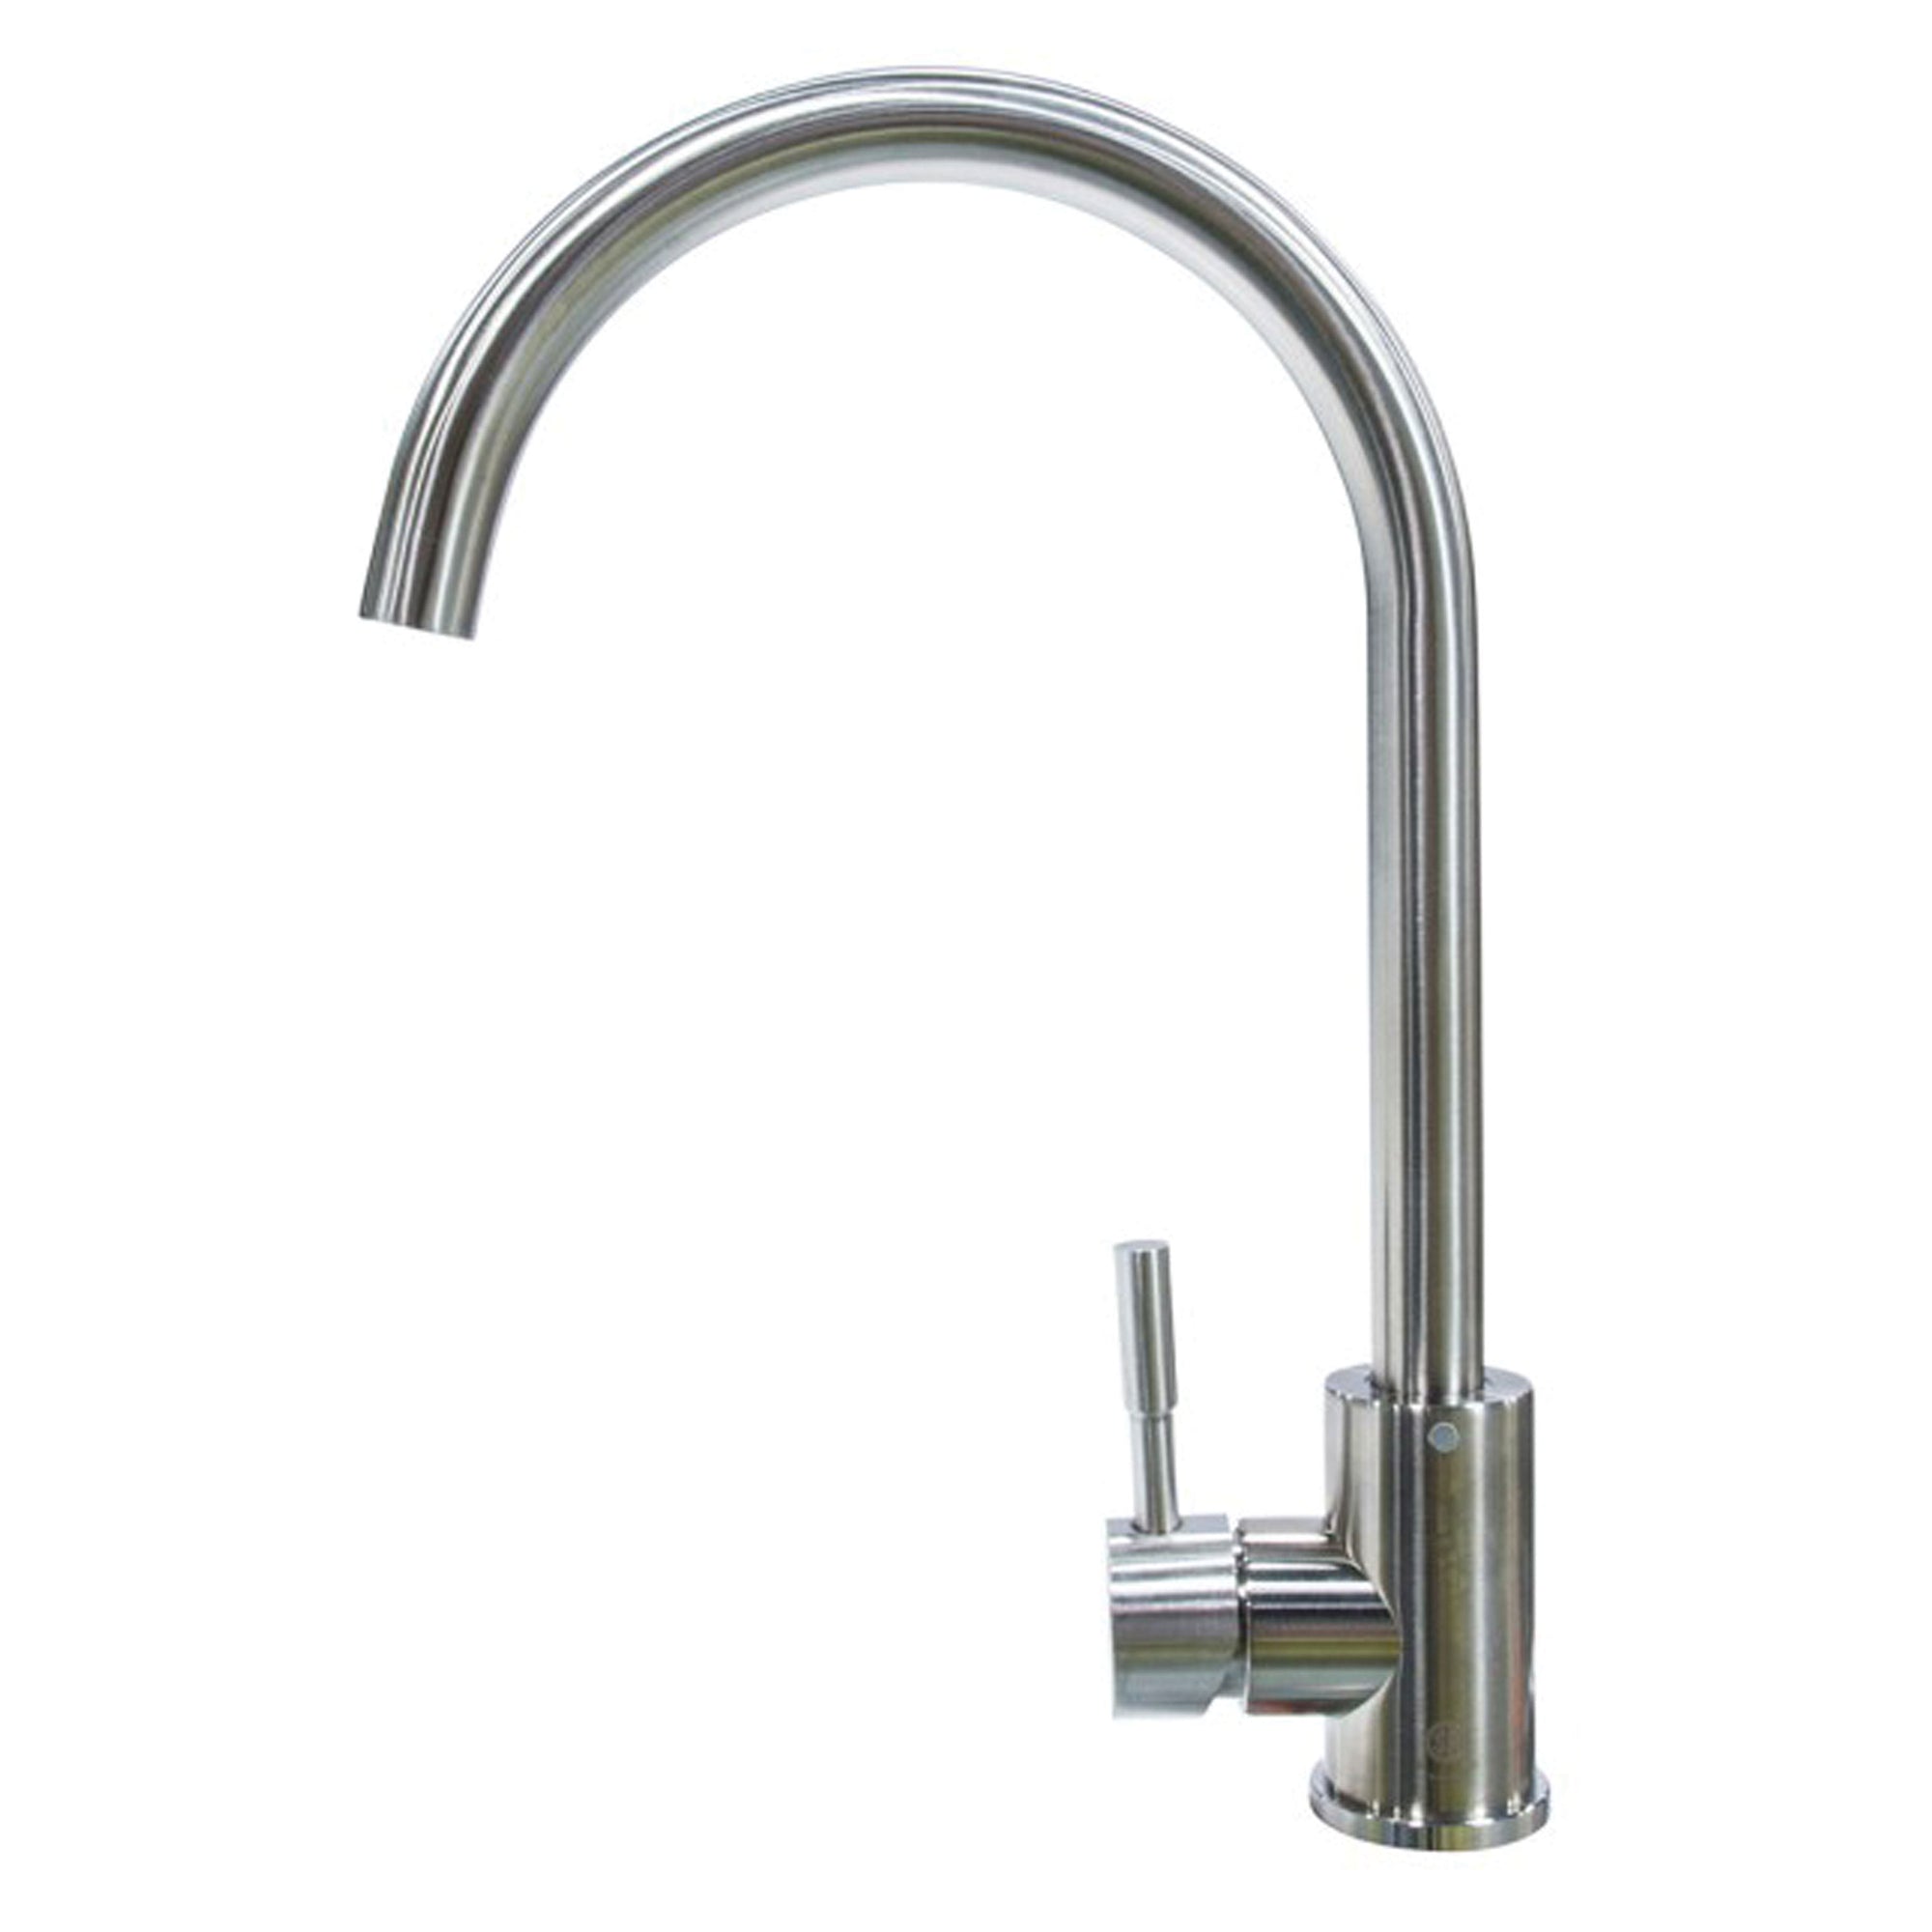 Lippert 719324 Stainless Steel Curved Gooseneck Faucet